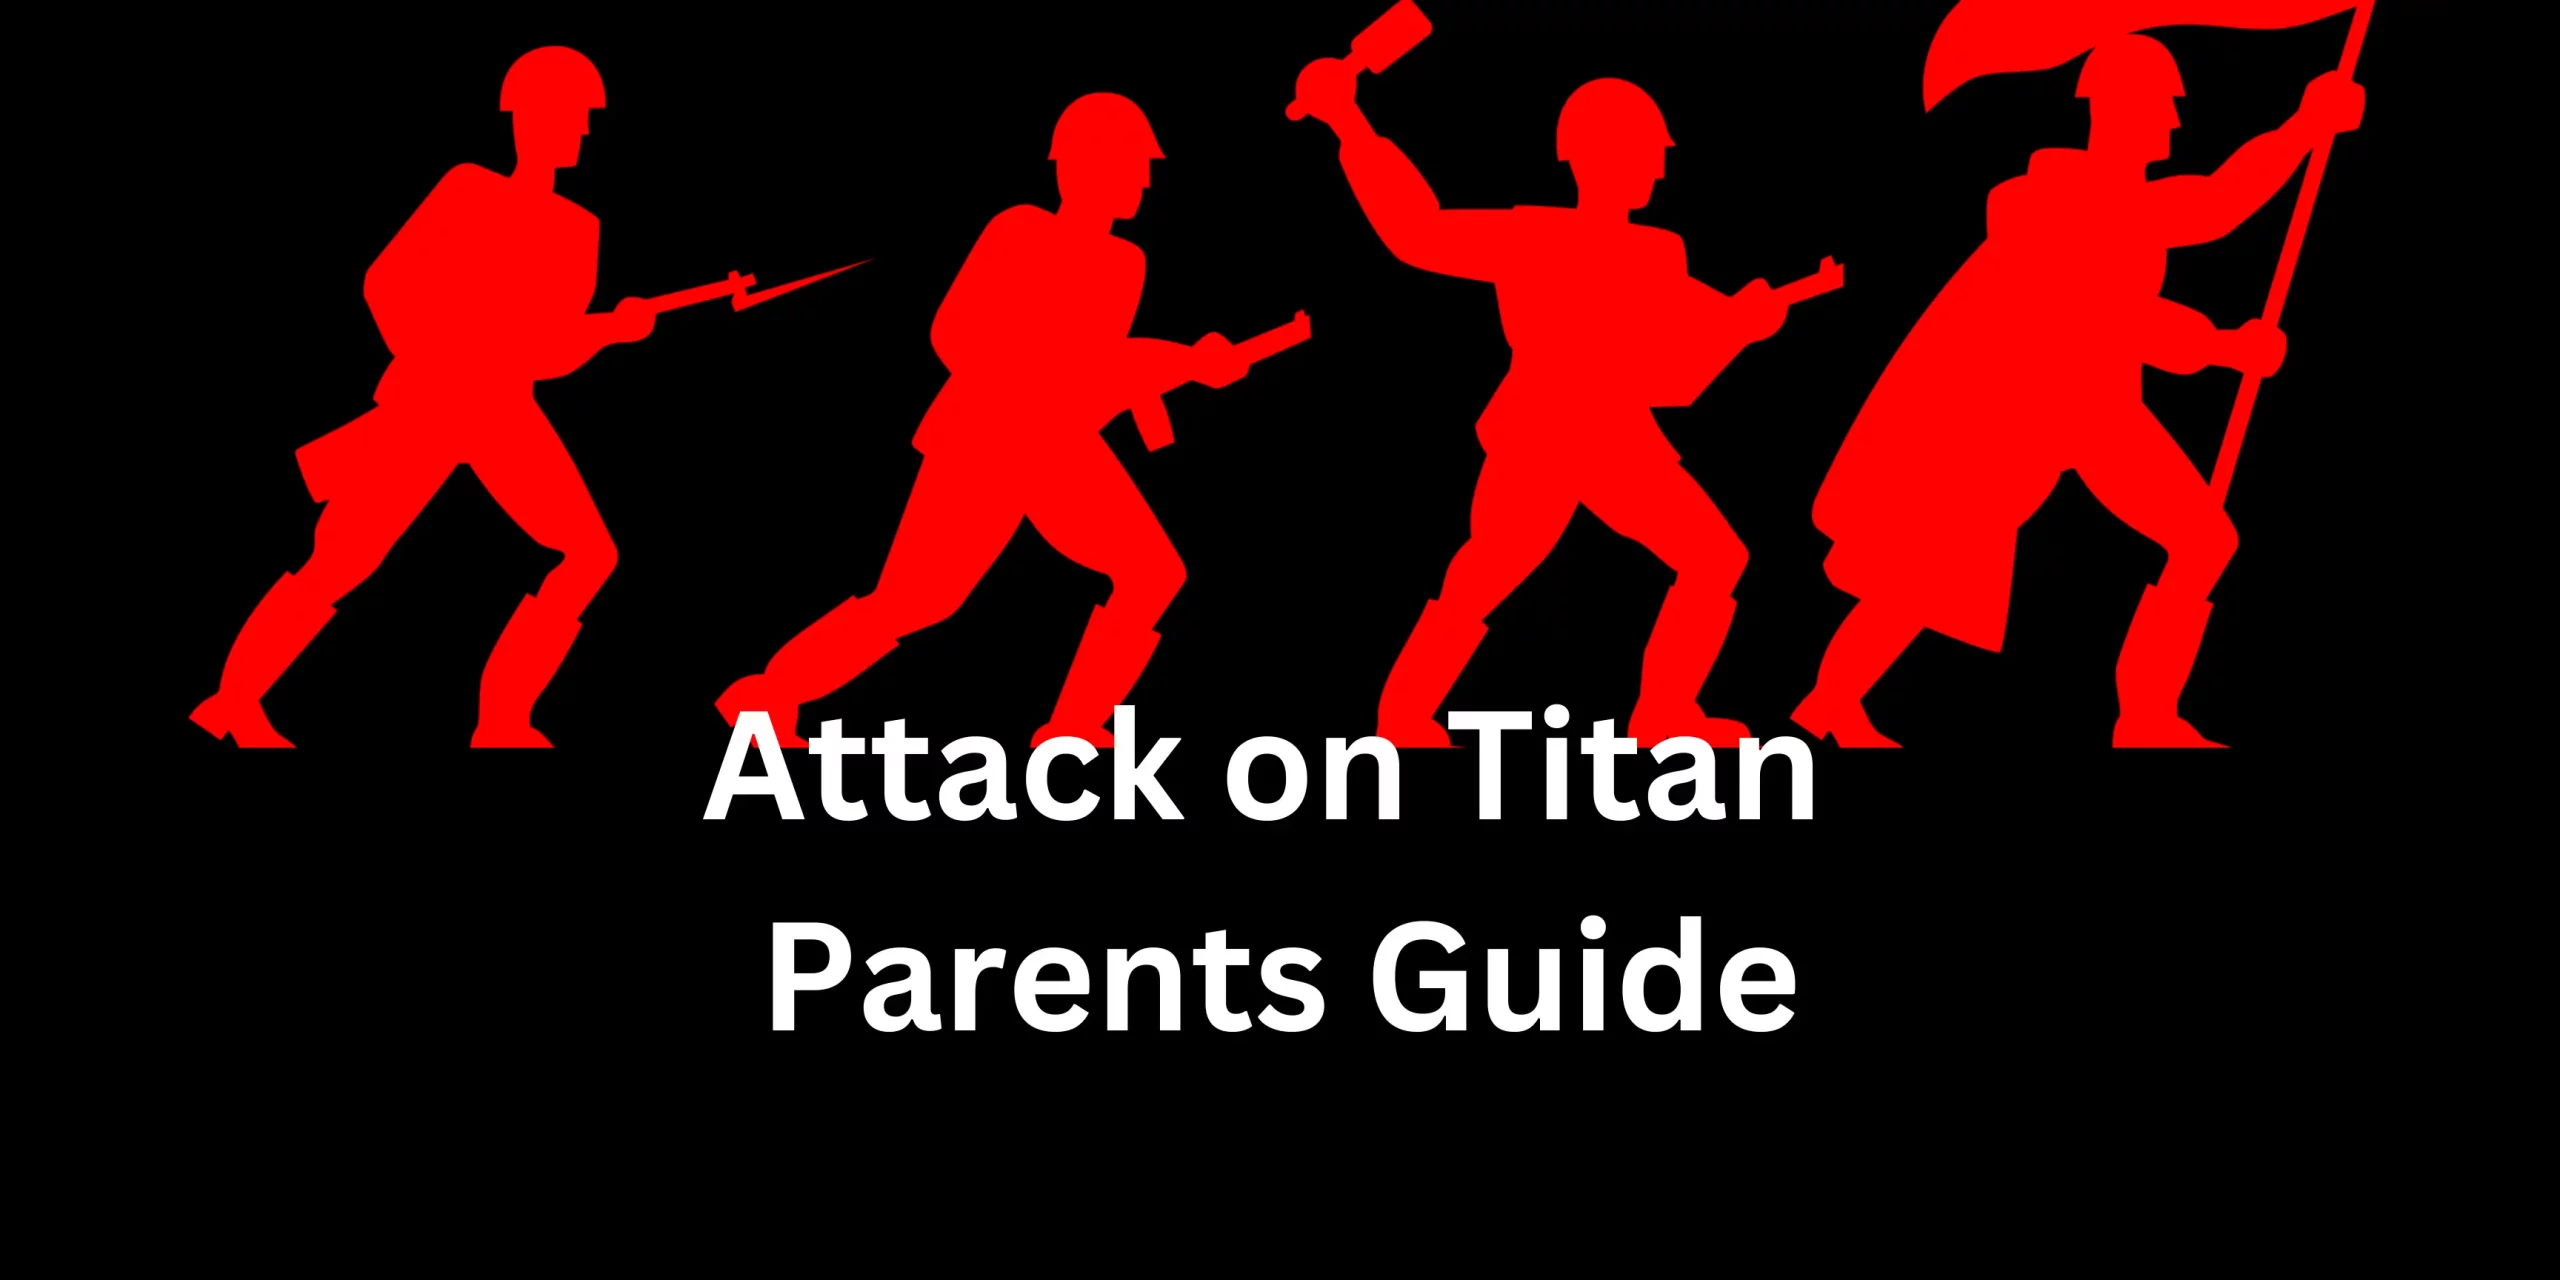 Attack on Titan Parents Guide